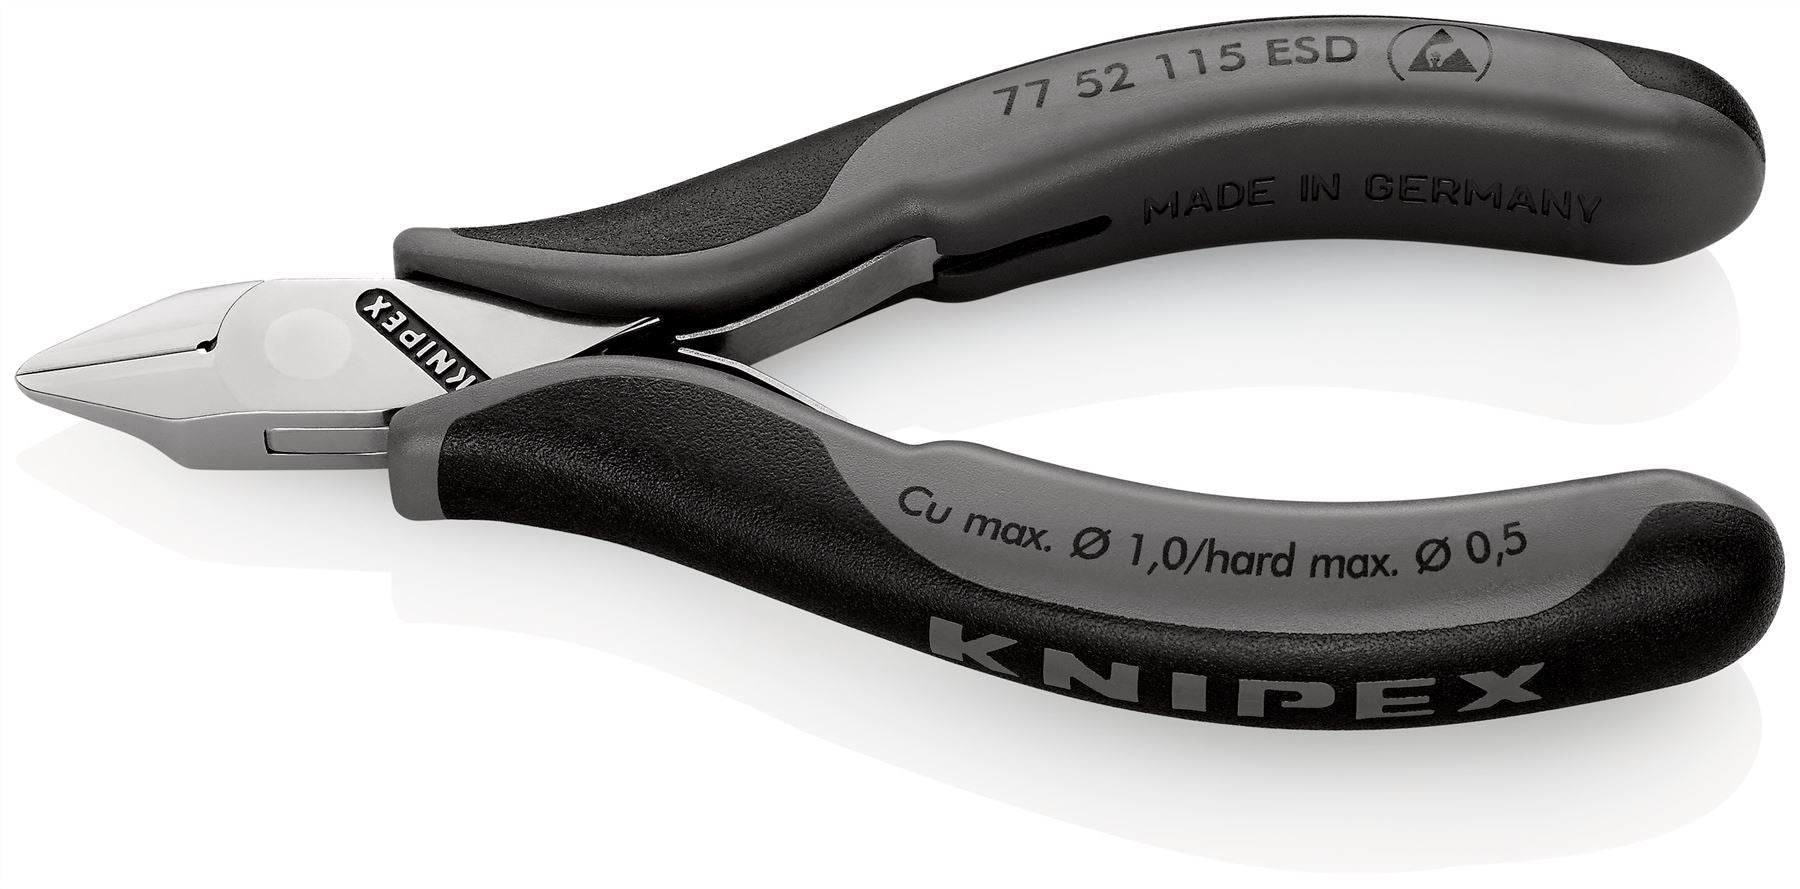 KNIPEX Electronics Diagonal Cutter Pliers Pointed Flat Head Small Bevel 115mm Multi Component Grips 77 52 115 ESD